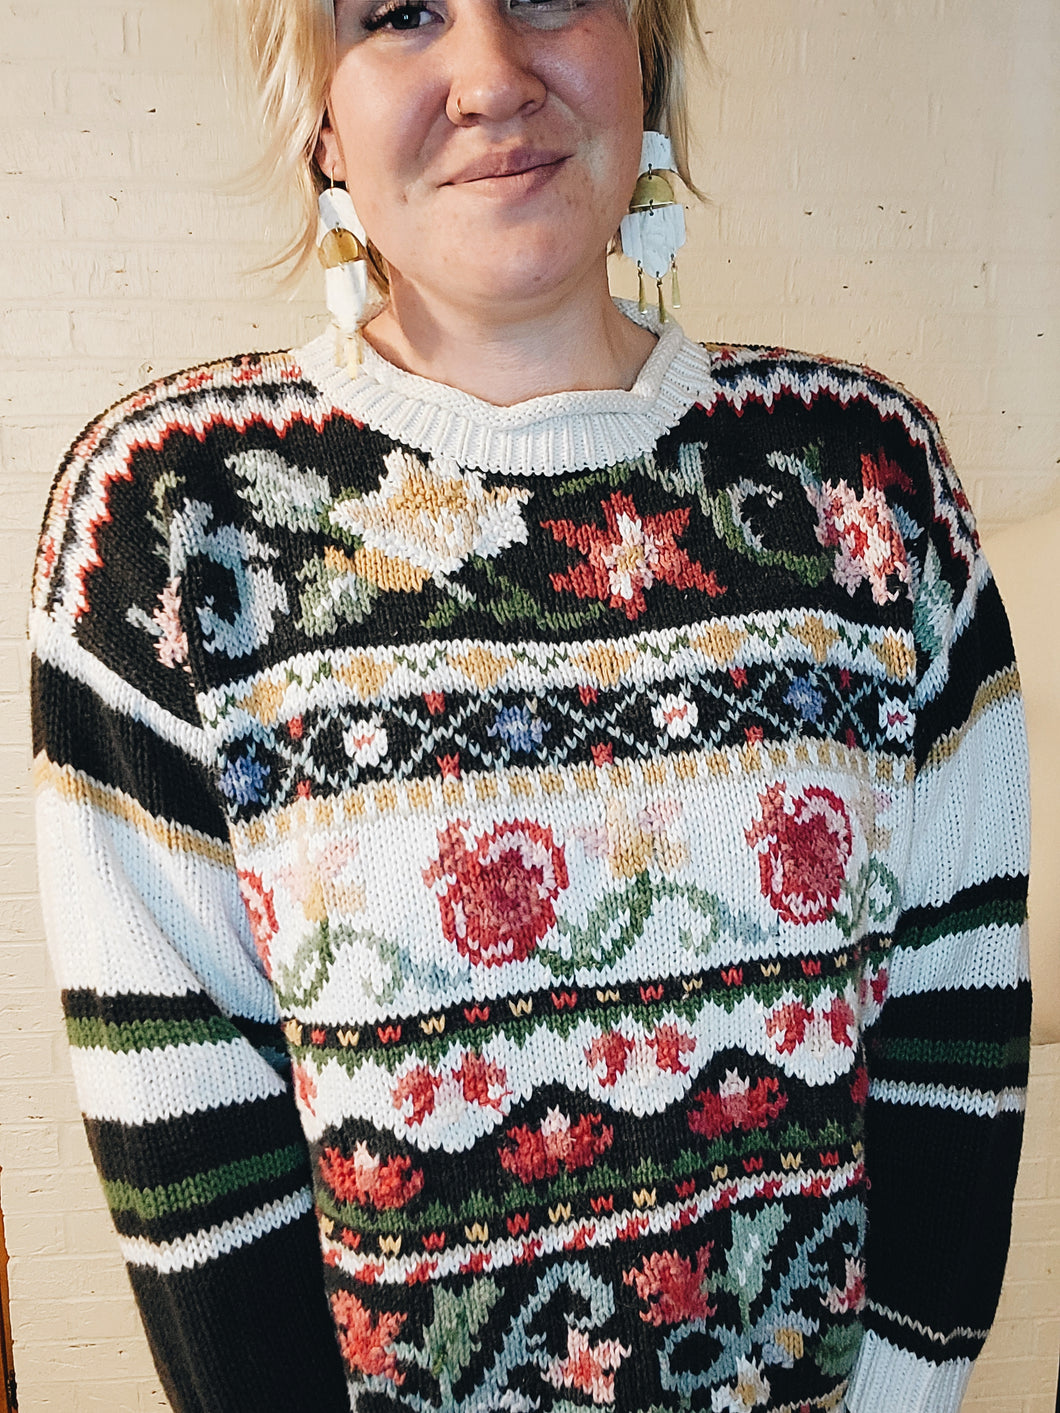 up to XL - floral cross-stitch style sweater